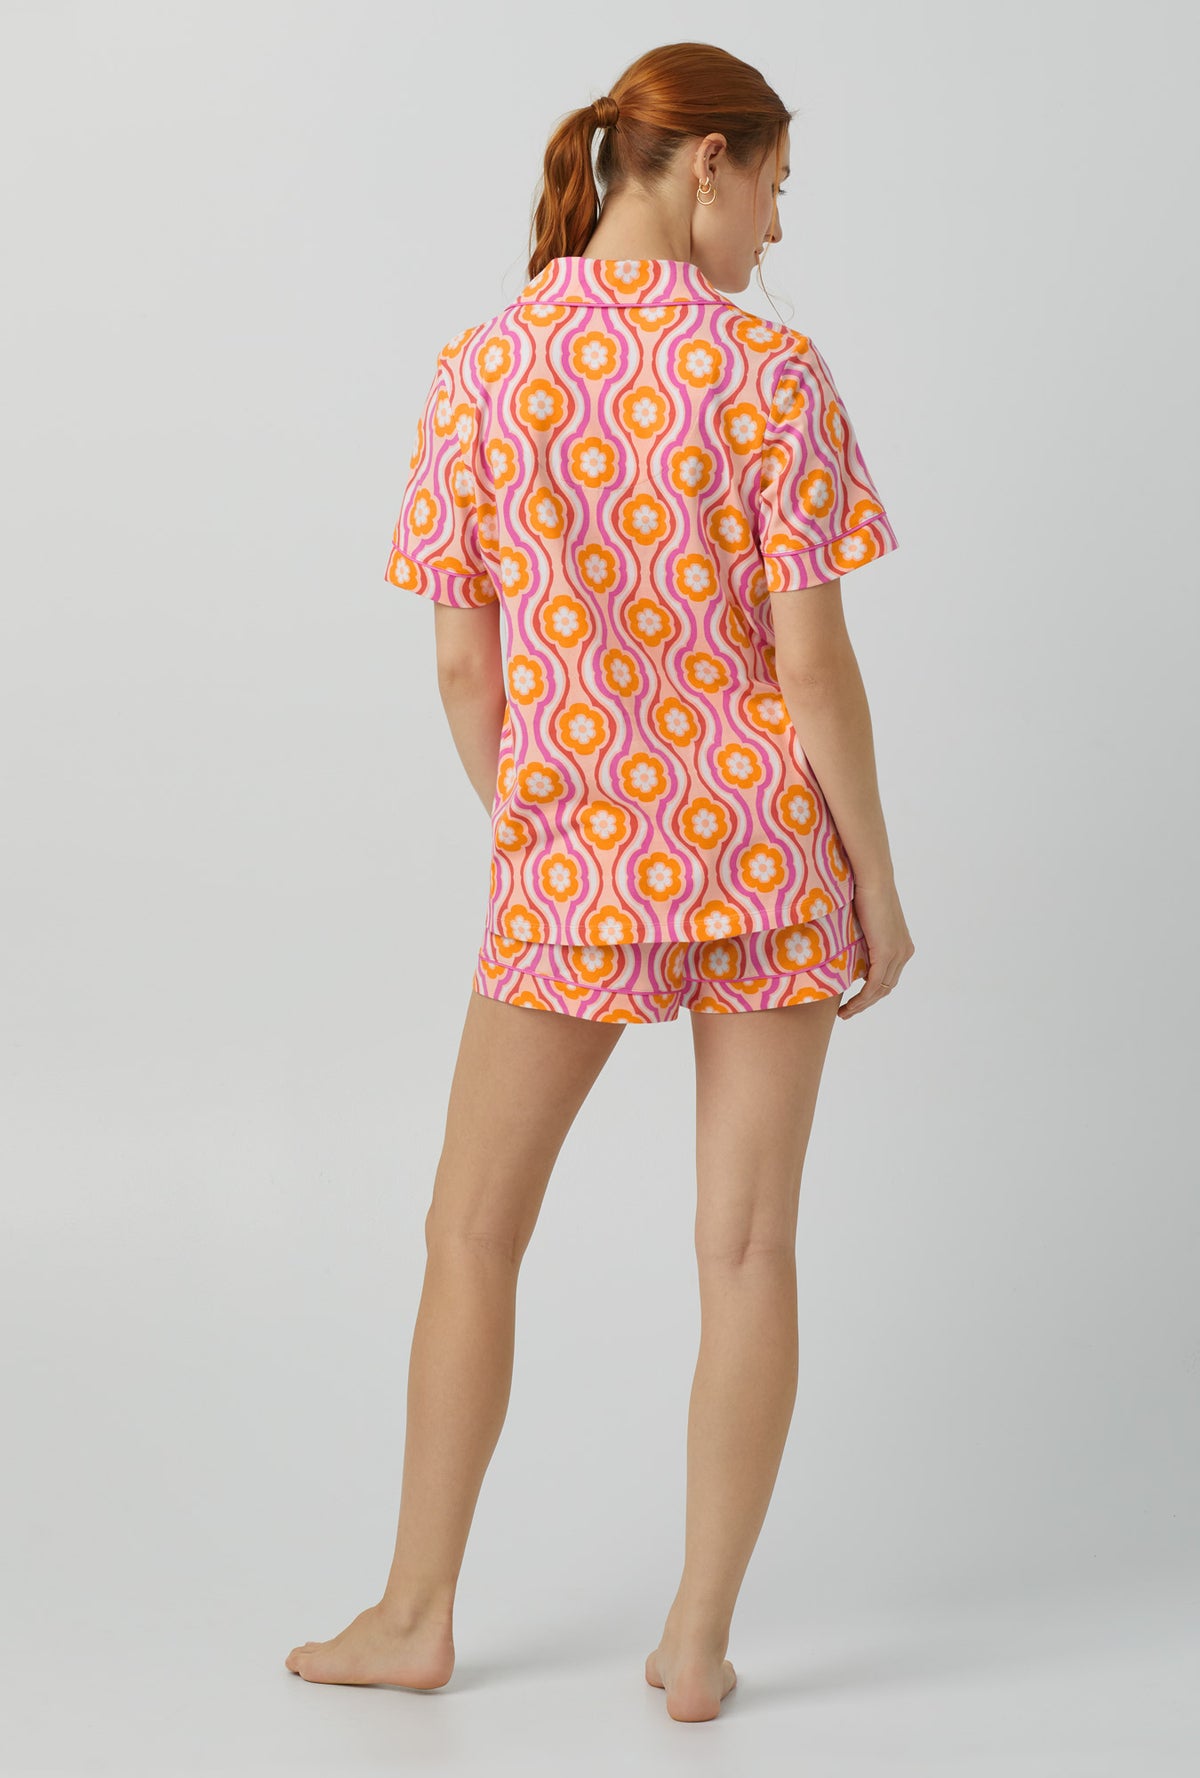 A lady wearing Short Sleeve Classic Shorty Stretch Jersey PJ Set with flower swirl print